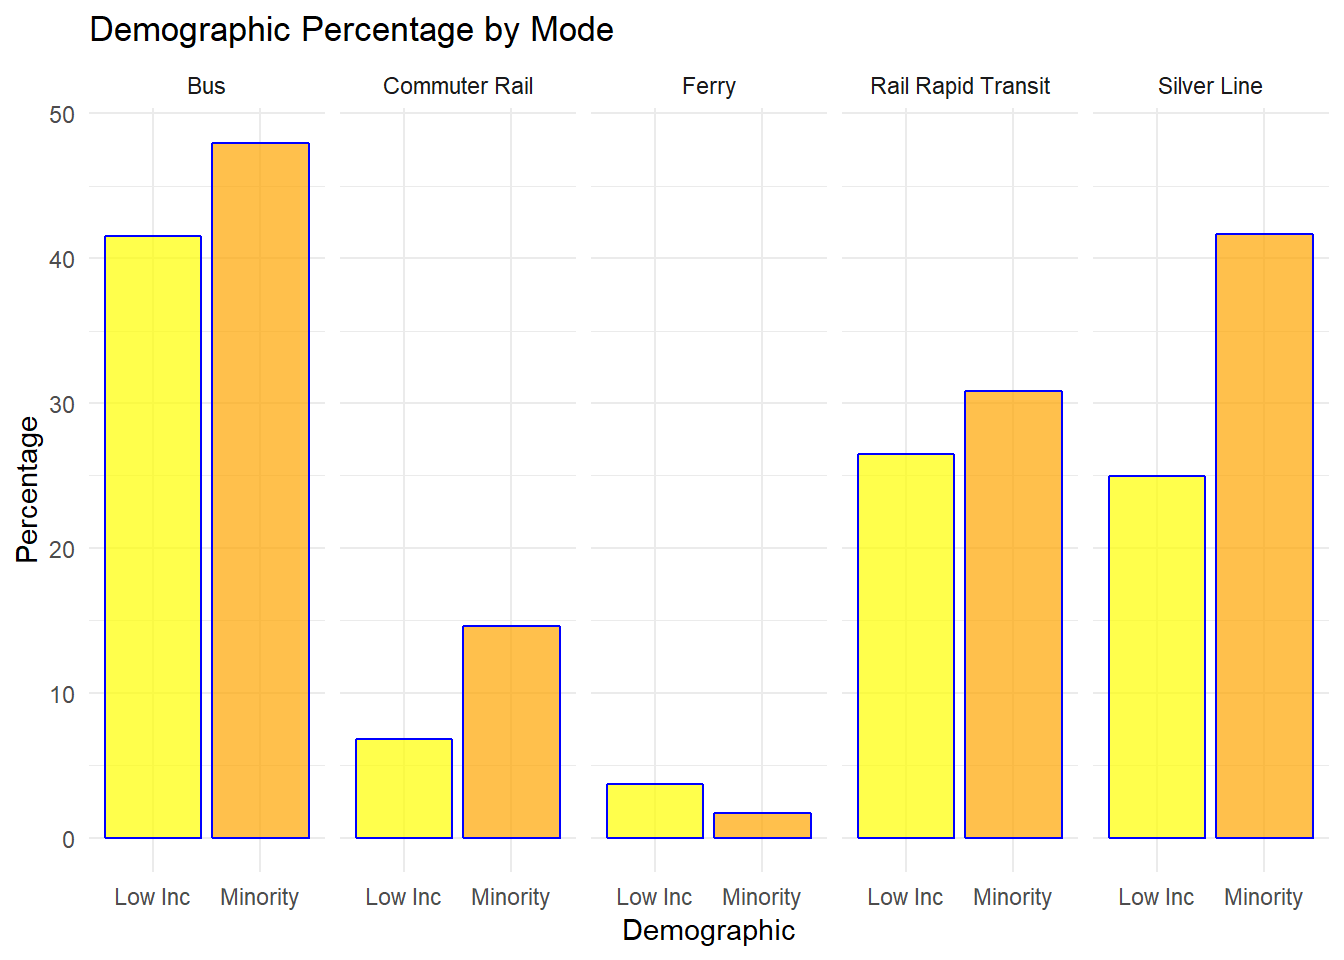 Column graph of demographic percentage by transit mode.